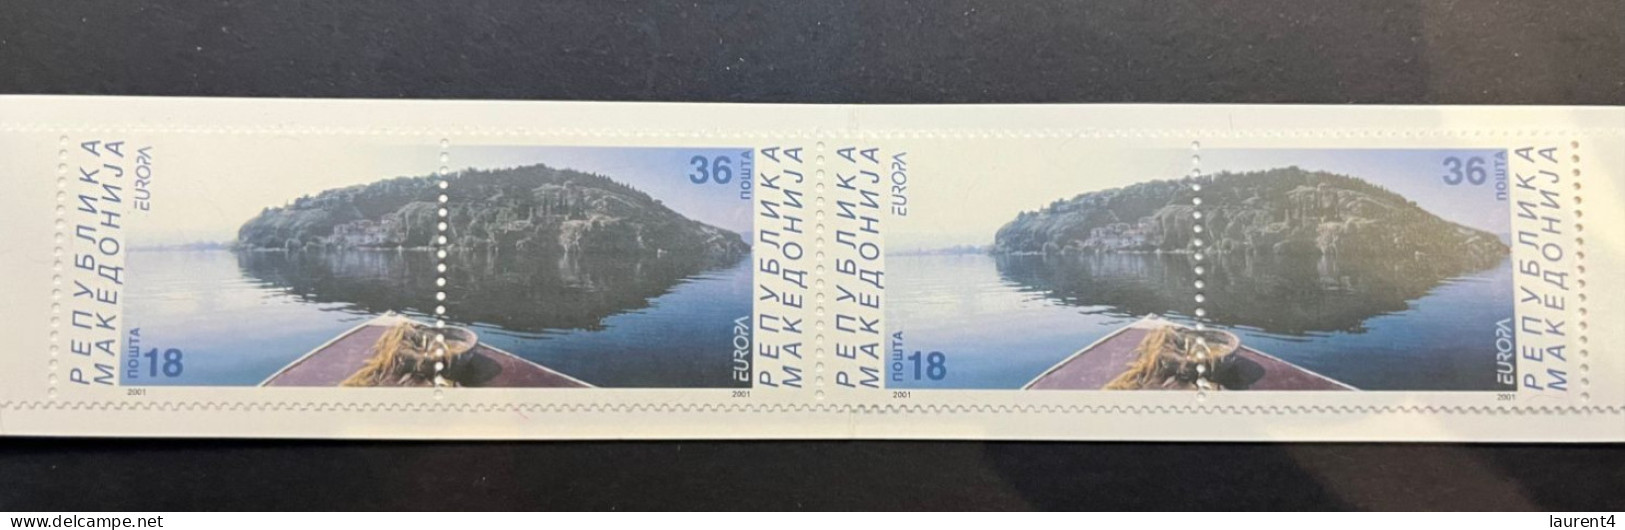 3-8-2023 (stamp) EUROPA CEPT - Mint / Neuf - 2001 - Macedonia (pair From Top Of Sheetlet) - 2001